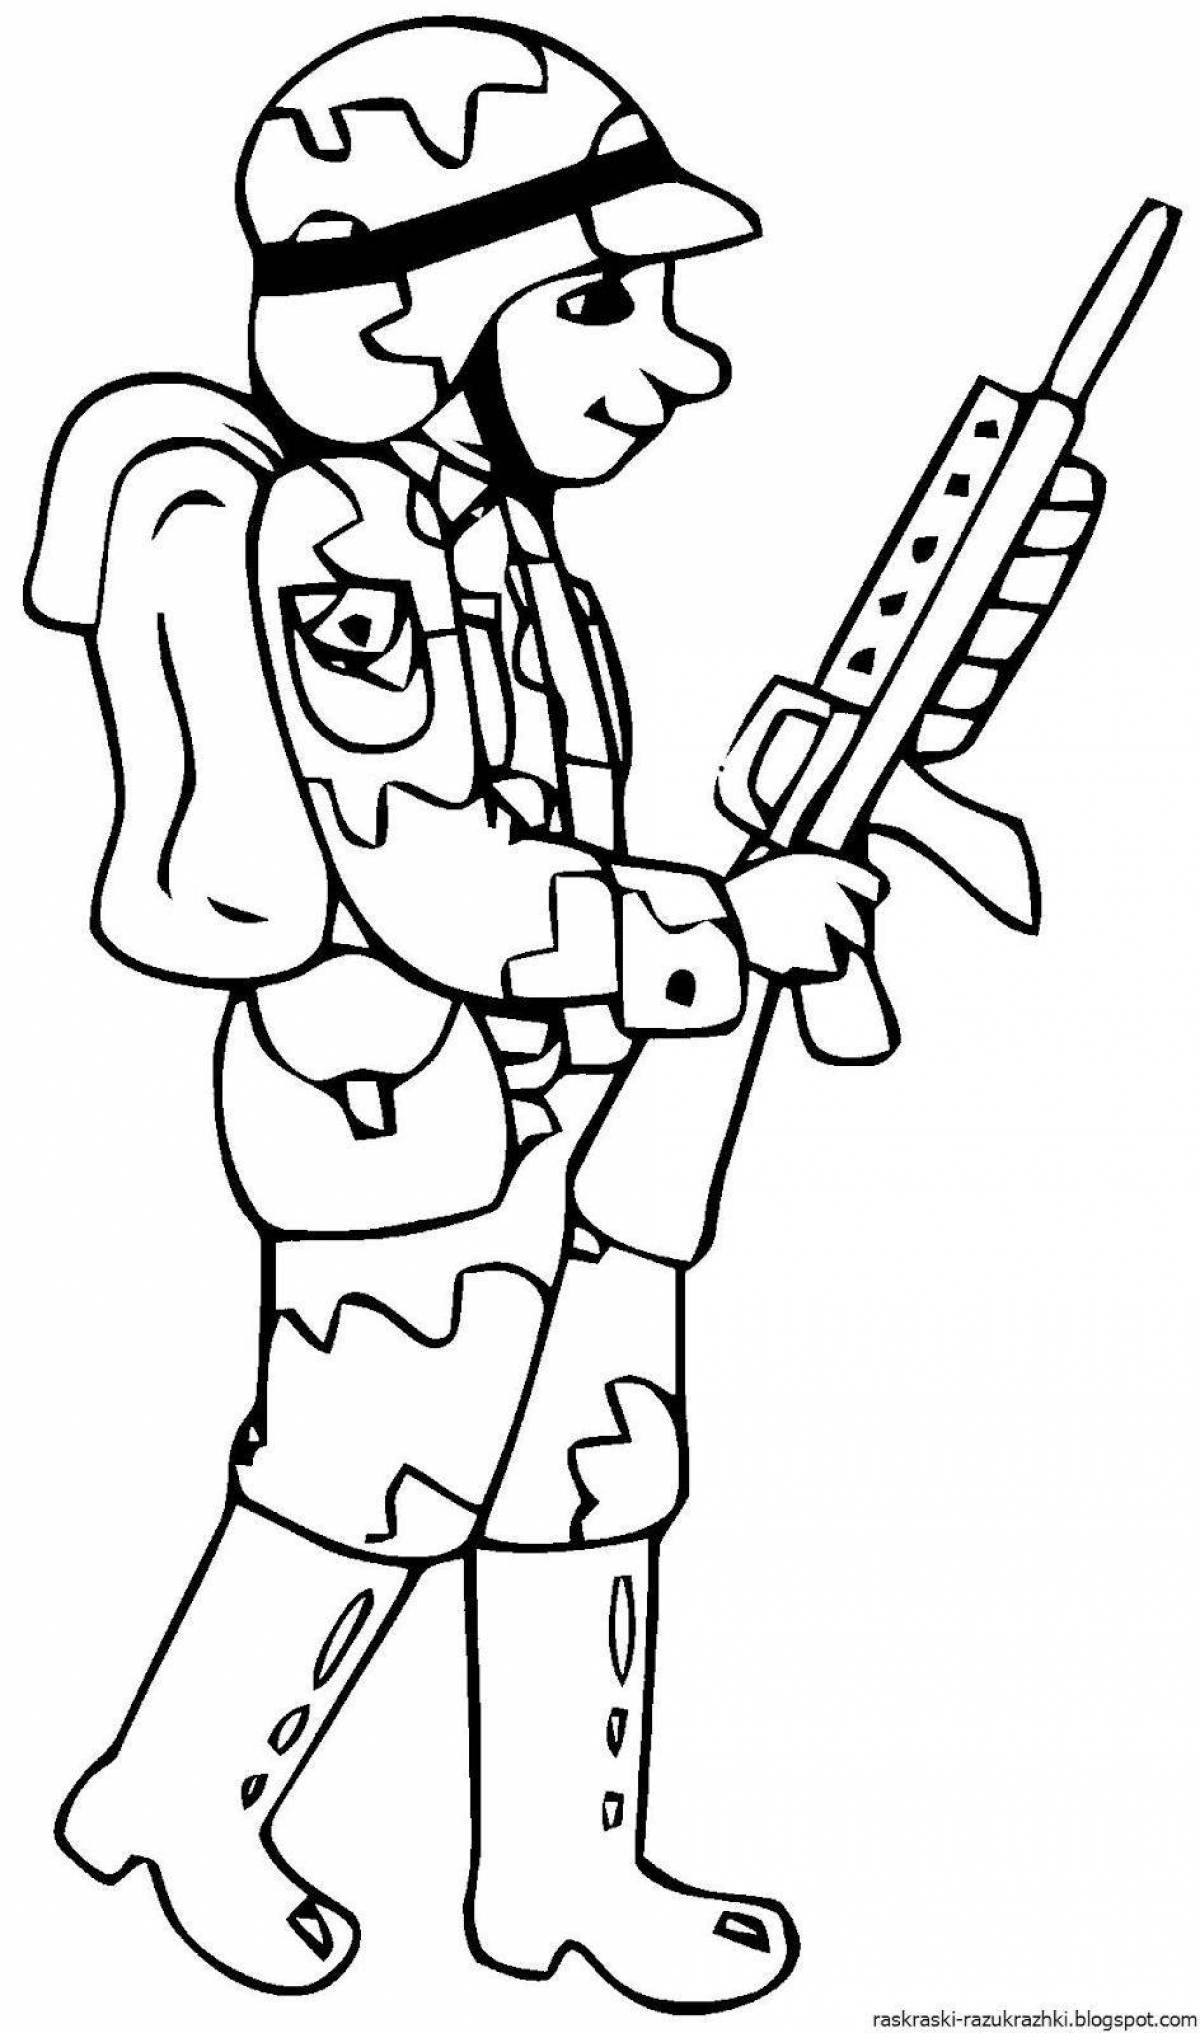 Bright soldier drawing for kids